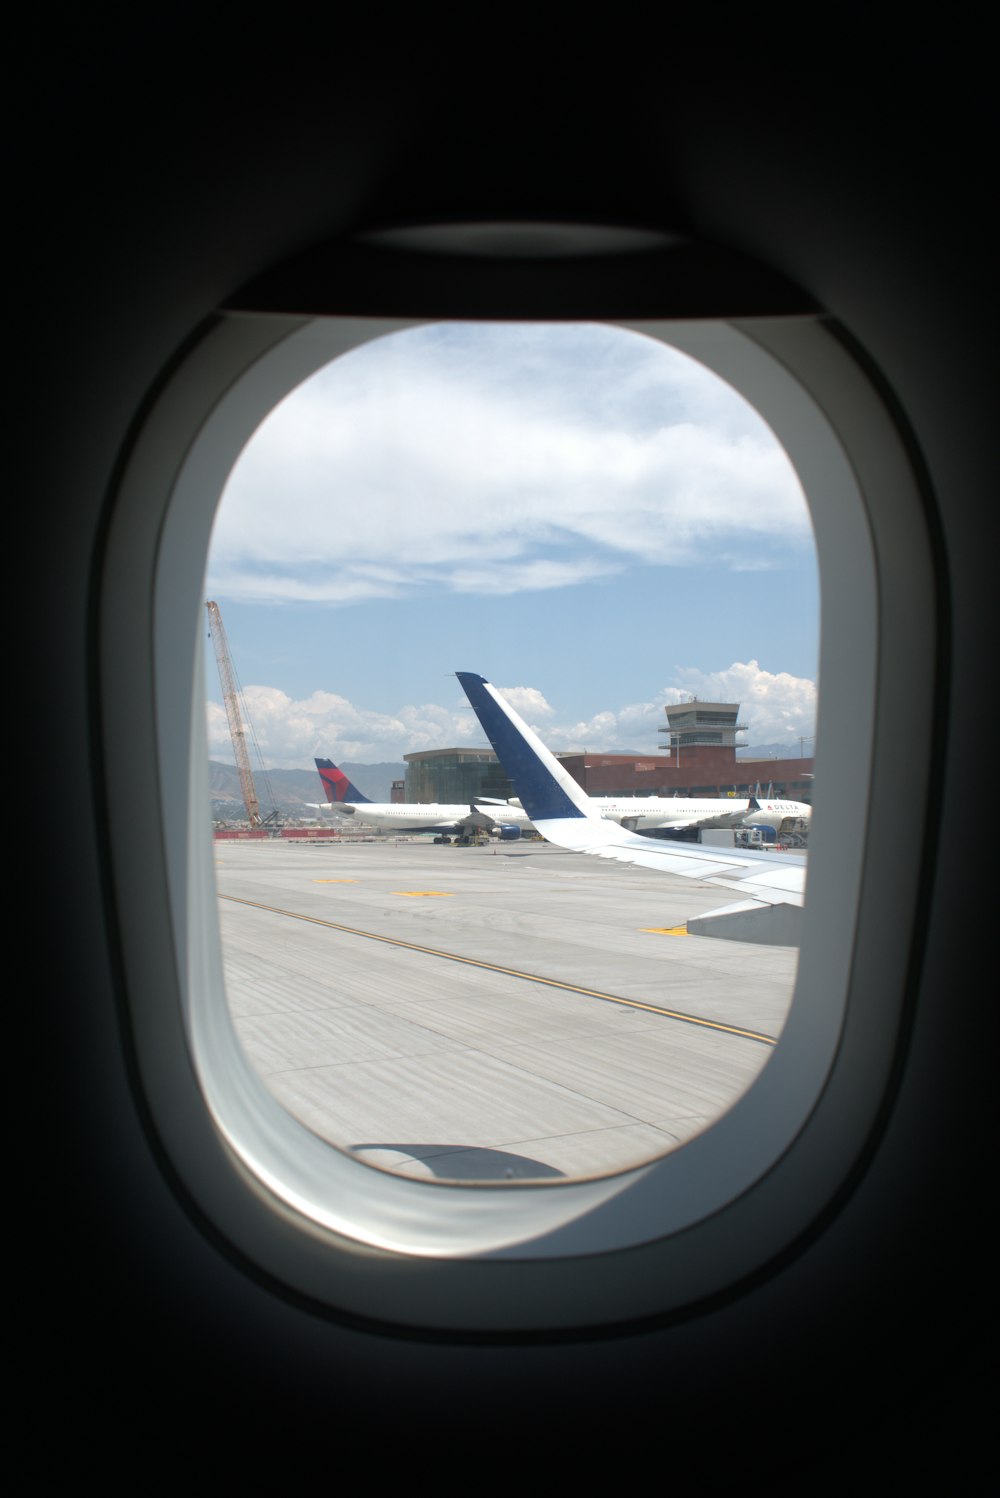 a view of an airplane wing and the wing of another plane